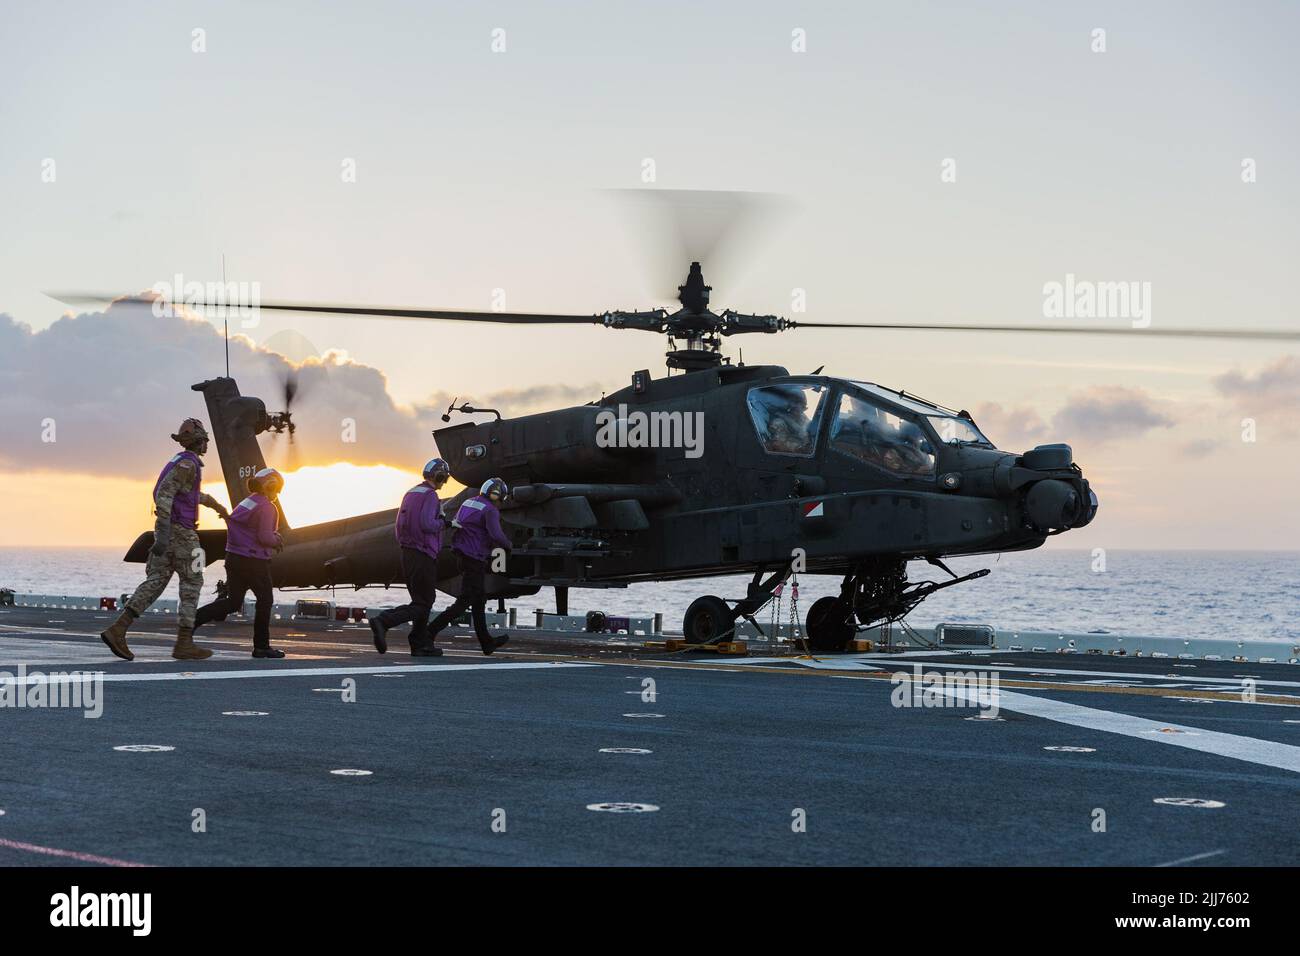 220715-A-JW340-1081   PACIFIC OCEAN (July 15, 2022) A AH-64D Apache helicopter, attached to the 25th Combat Aviation Brigade, completes deck landing qualification (DLQ) training aboard Wasp-class amphibious assault ship USS Essex (LHD 2) during Rim of the Pacific (RIMPAC) 2022. Twenty-six nations, 38 ships, three submarines, more than 170 aircraft and 25,000 personnel are participating in RIMPAC from June 29 to Aug. 4 in and around the Hawaiian Islands and Southern California. The world’s largest international maritime exercise, RIMPAC provides a unique training opportunity while fostering and Stock Photo